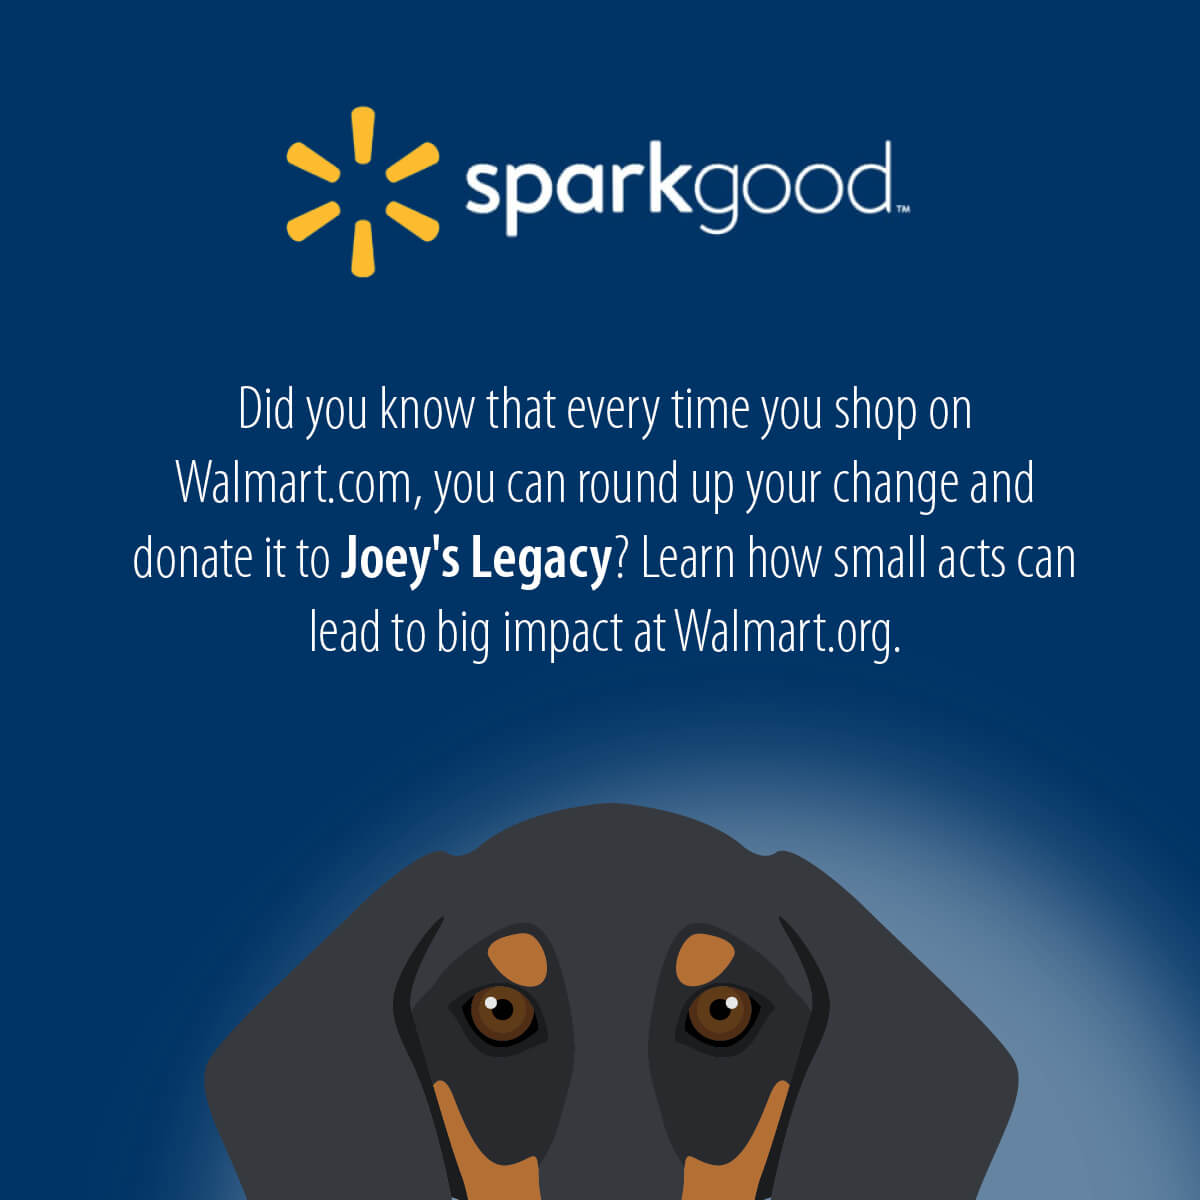 SparkGood program by Walmart. We are a SparkGood charity. Please consider rounding up your Walmart purchases and donate to Joey's Legacy.